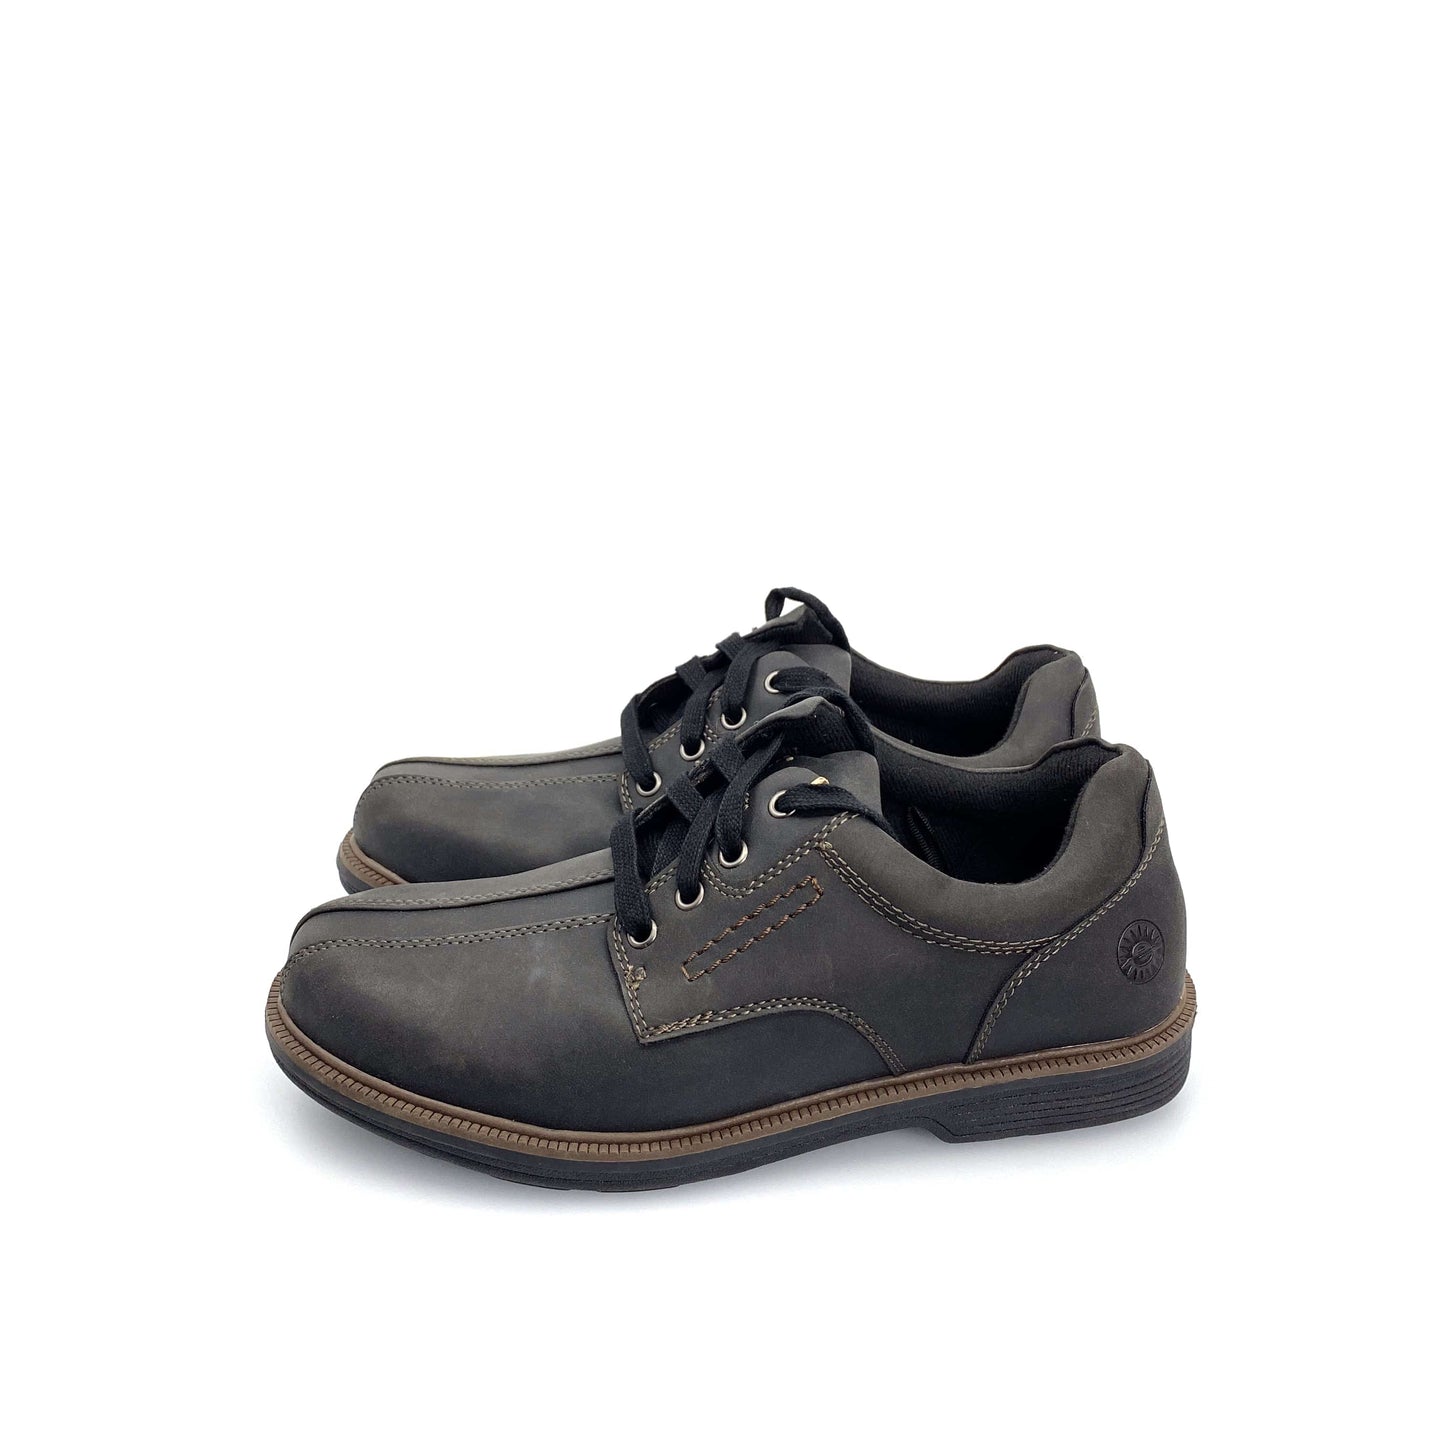 Earth Spirit Mens Powell Oxford Shoes Dark Gray Lace-Up